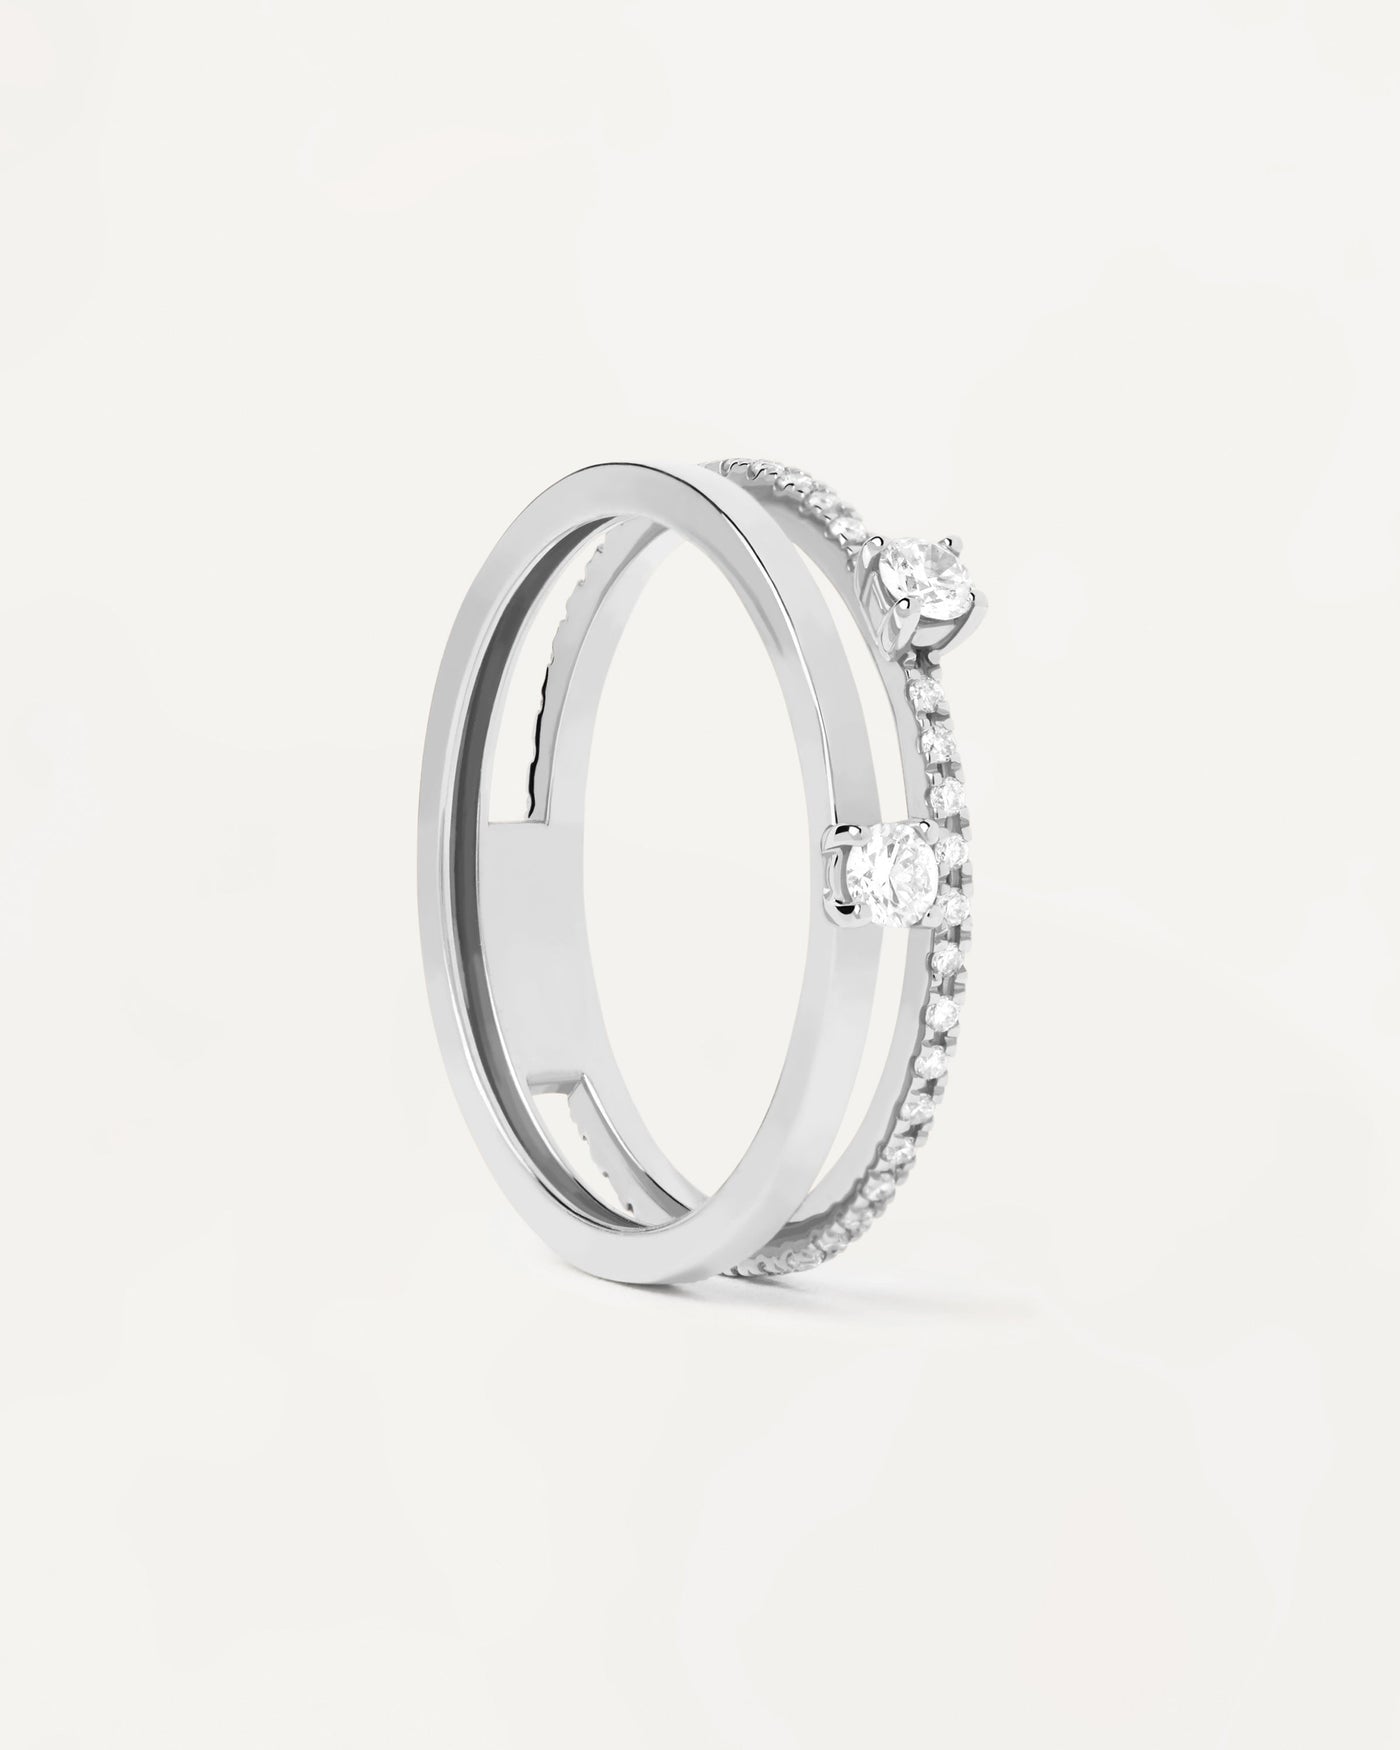 2023 Selection | Diamonds And White Gold Solitaire Dual Ring. Solid white gold doble ring, set with lab-grown diamonds of 0.34 carat. Get the latest arrival from PDPAOLA. Place your order safely and get this Best Seller. Free Shipping.